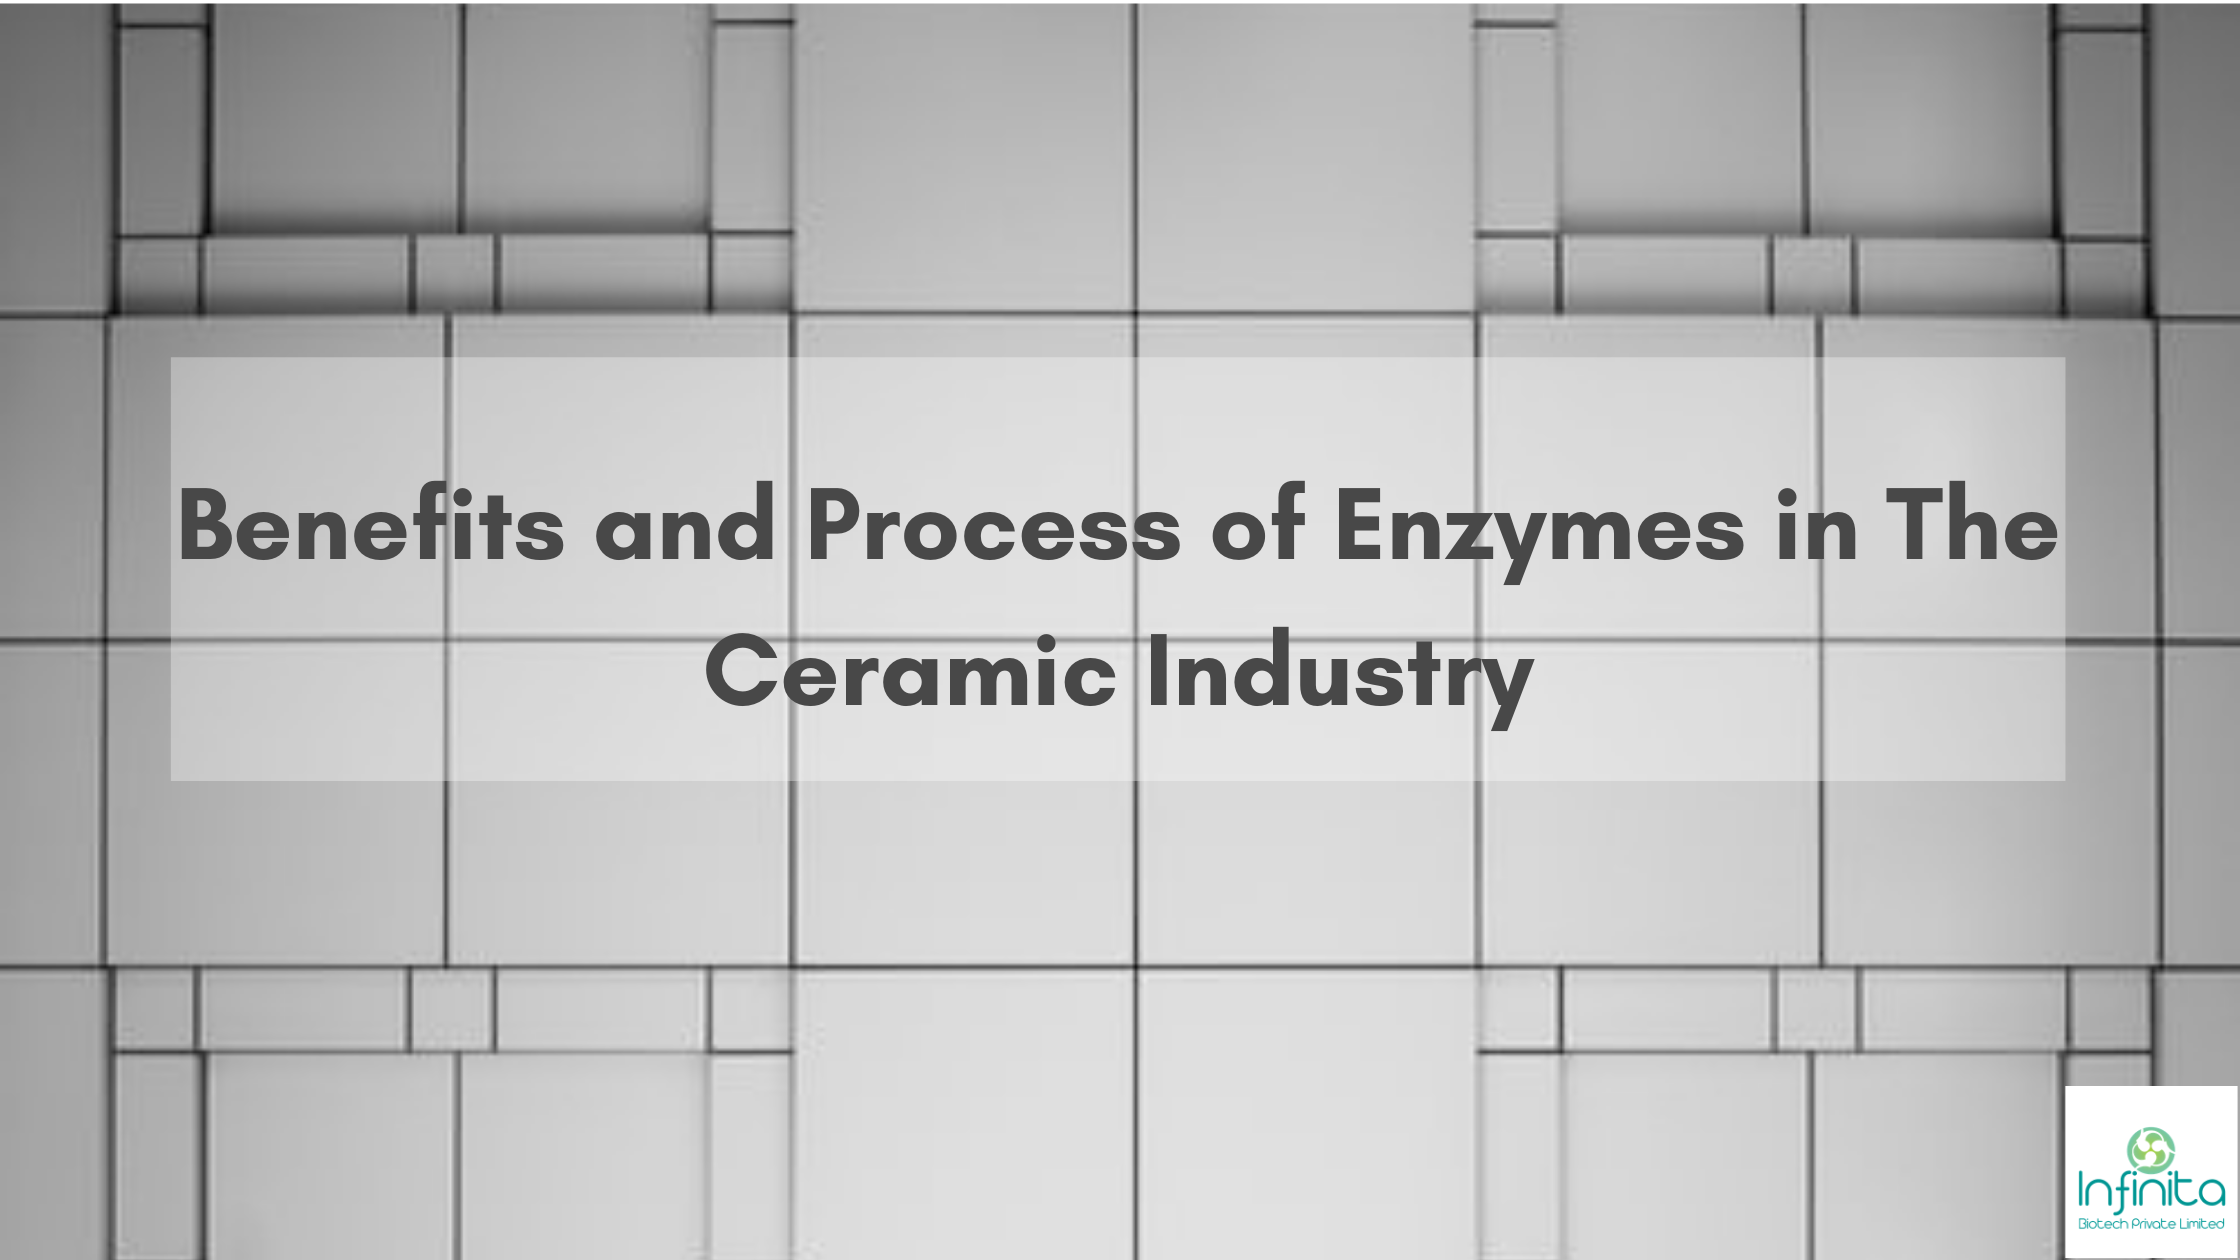 Benefits on enzymes in ceramic industry